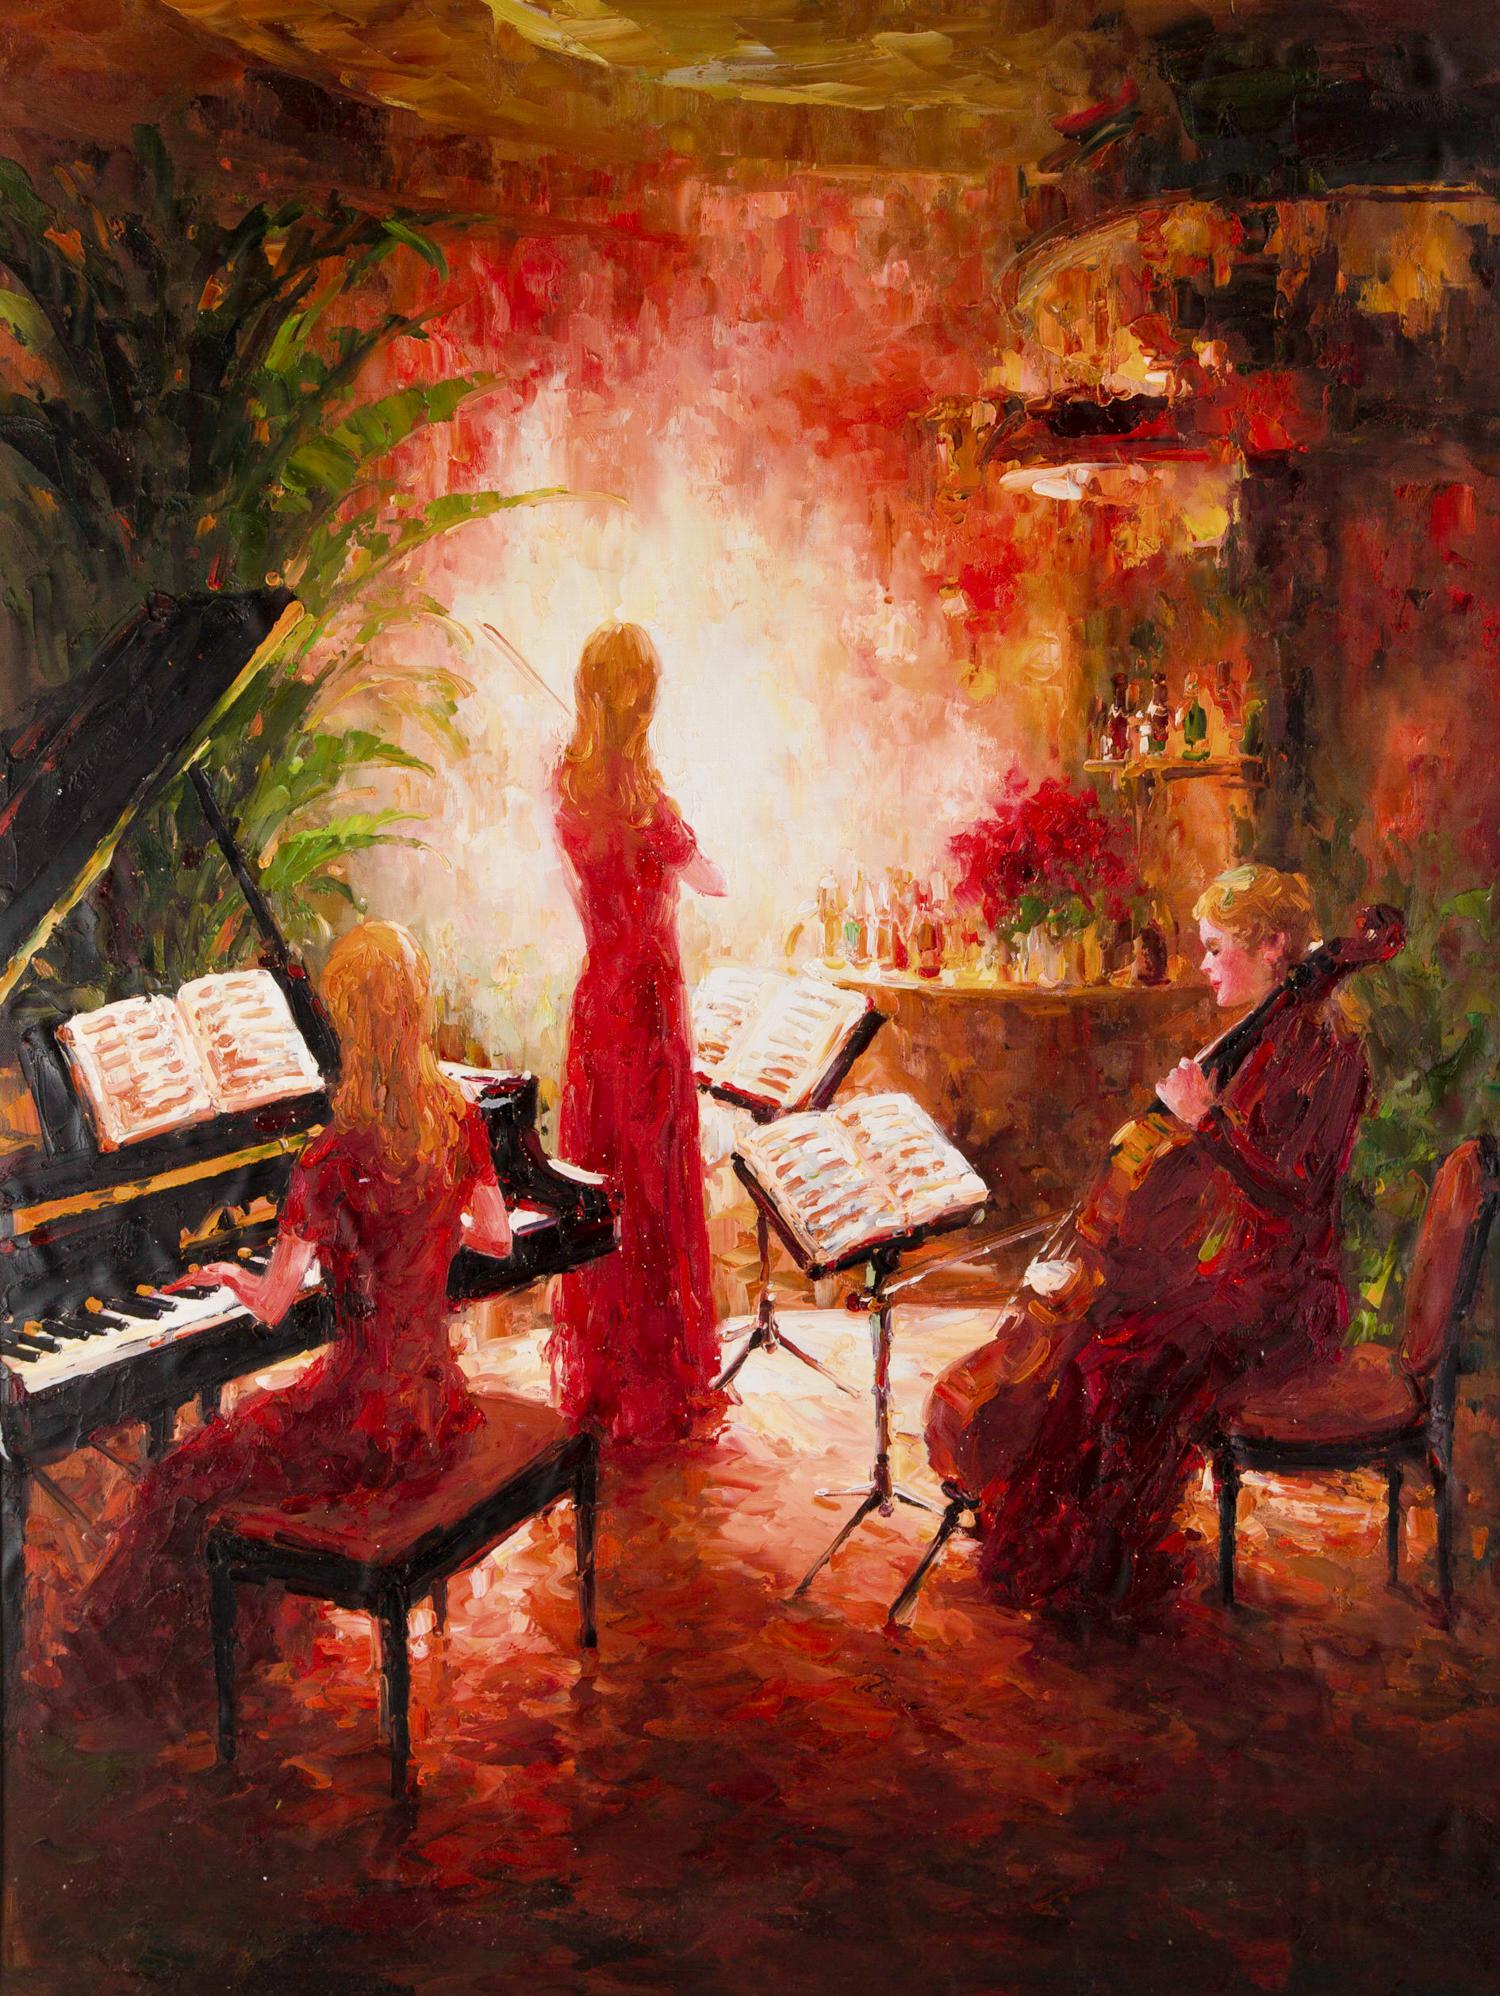  Title: Concert 2
 Medium: Oil on canvas
 Size: 39 x 30 inches
 Frame: Framing options available!
 Condition: The painting is laid on the matt board and appears to be in excellent condition.
 
 Year: 2000 Circa
 Artist: Lin Hongdan
 Signature: